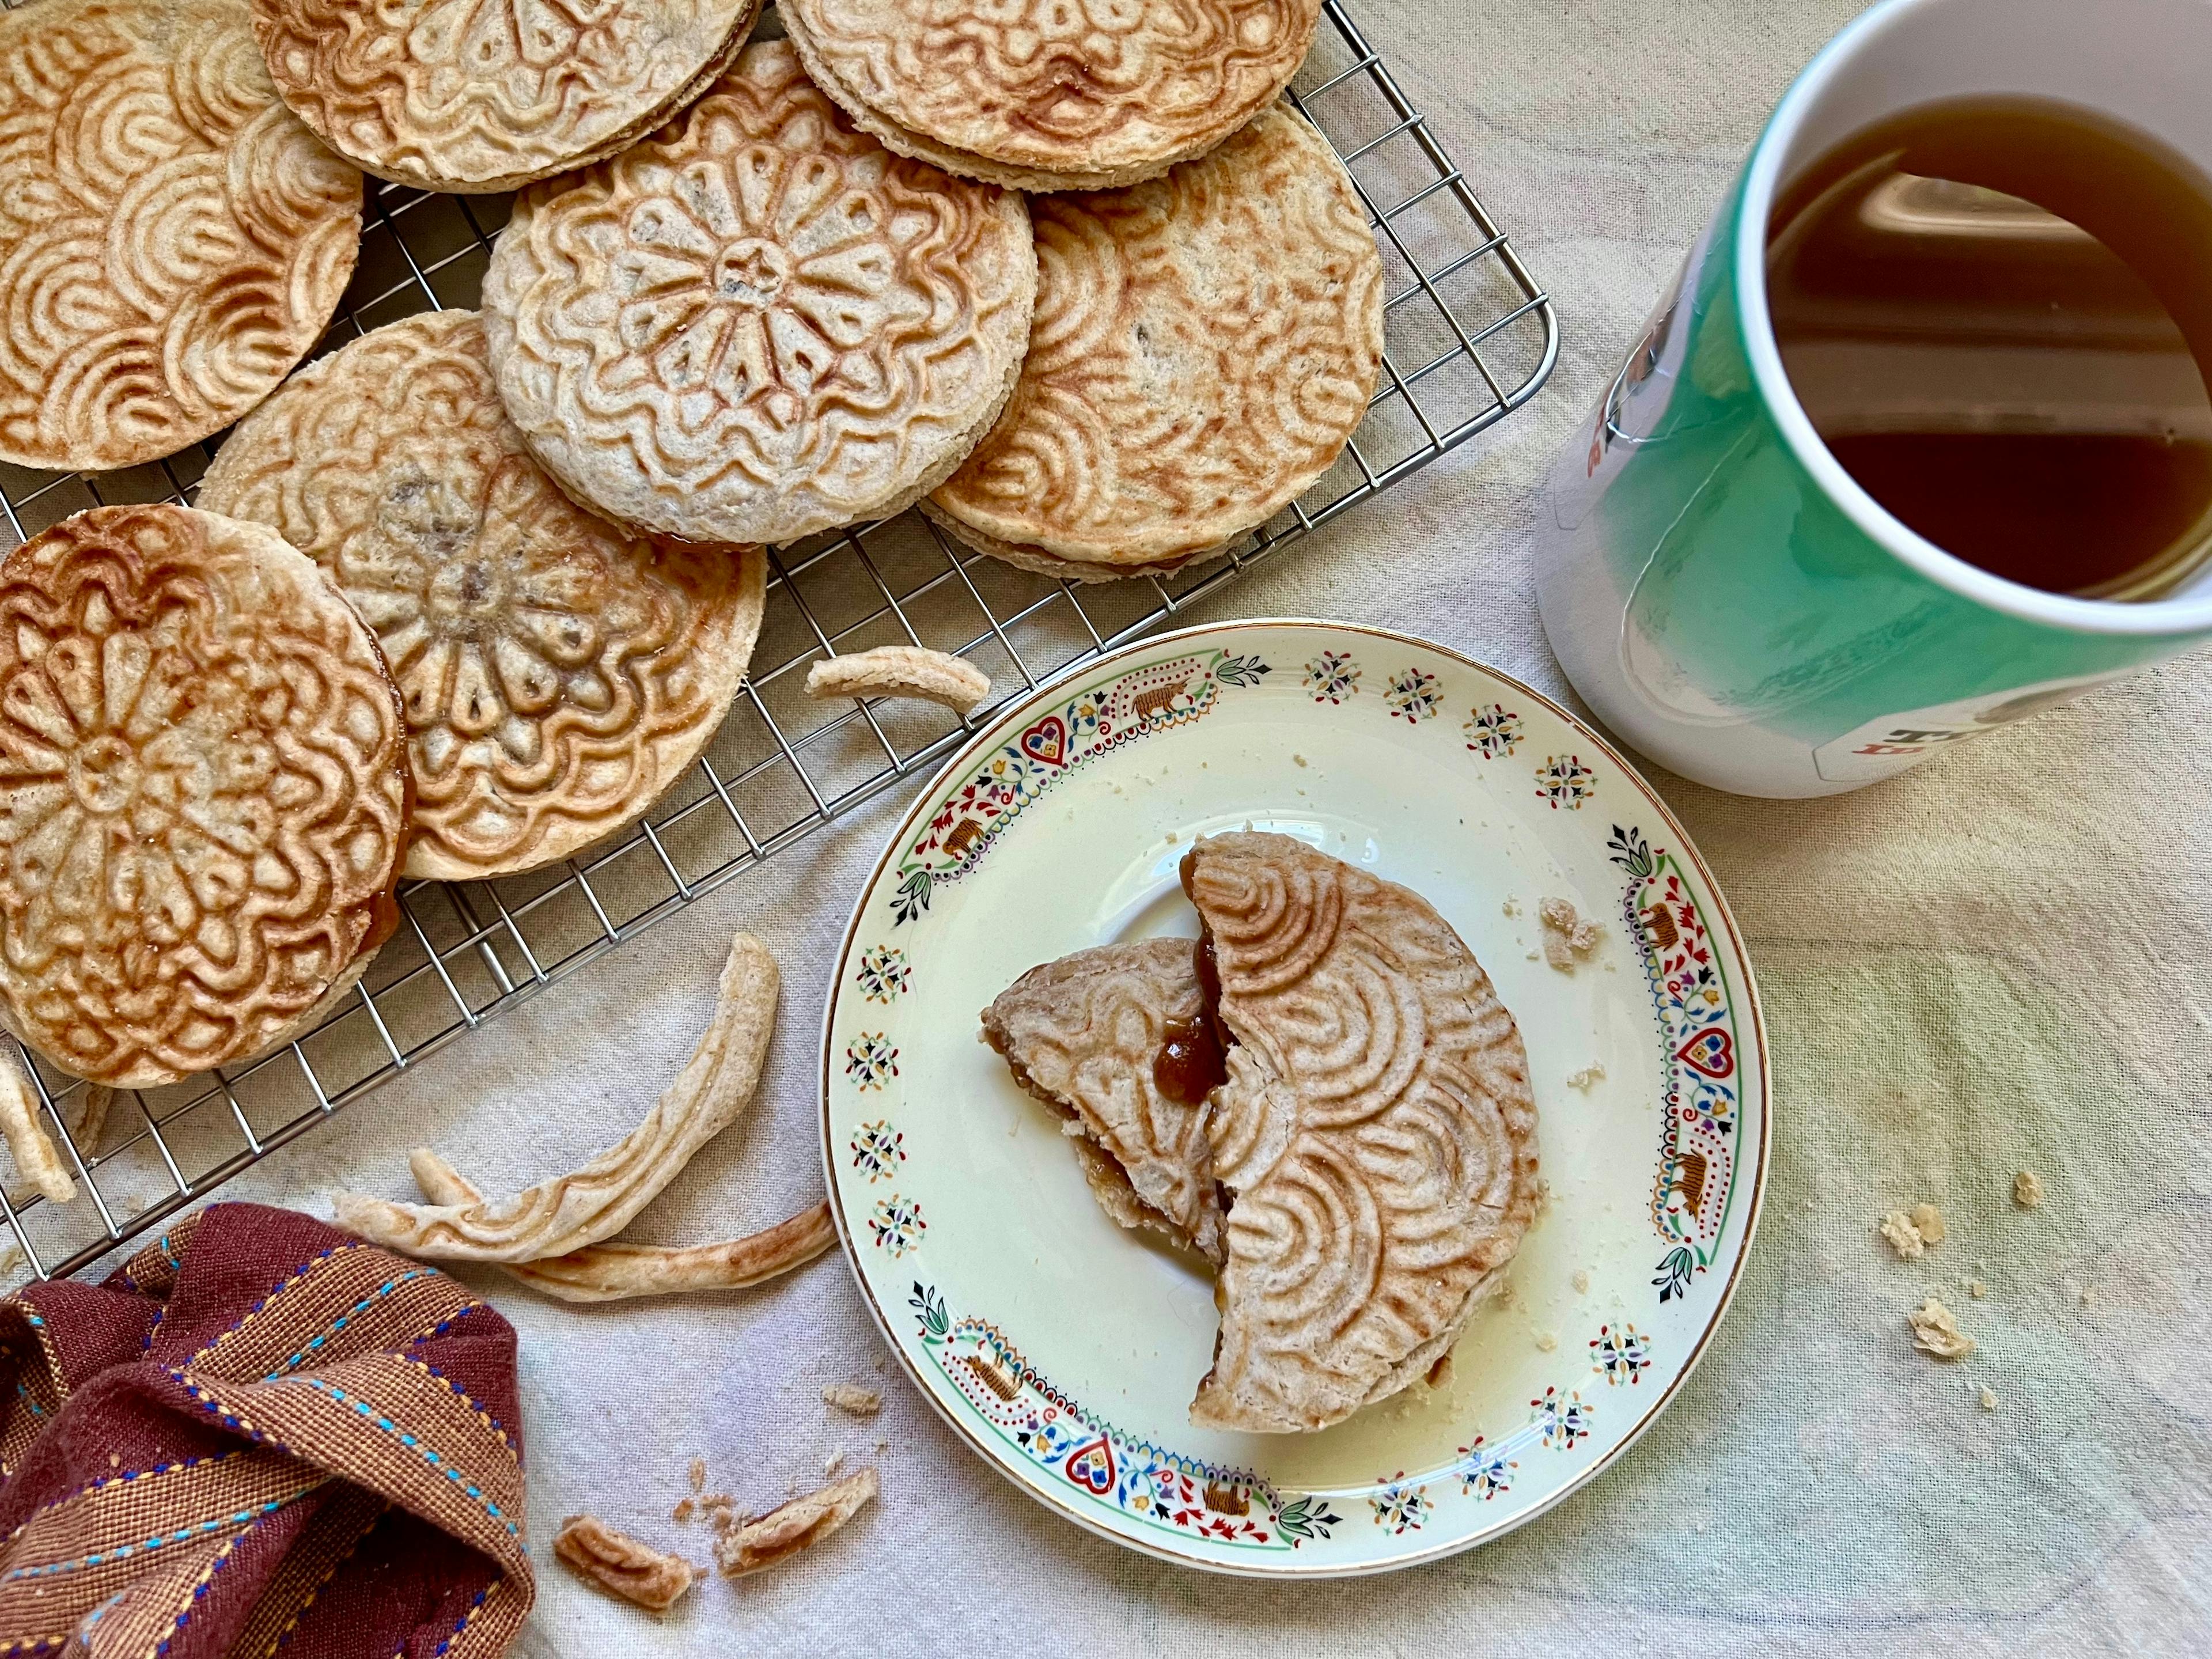 A bird's eye view of a wire rack of stroopwafels, plus one stroopwafel broken in half with caramel oozing out on a small saucer. There is also a cup of tea in frame.